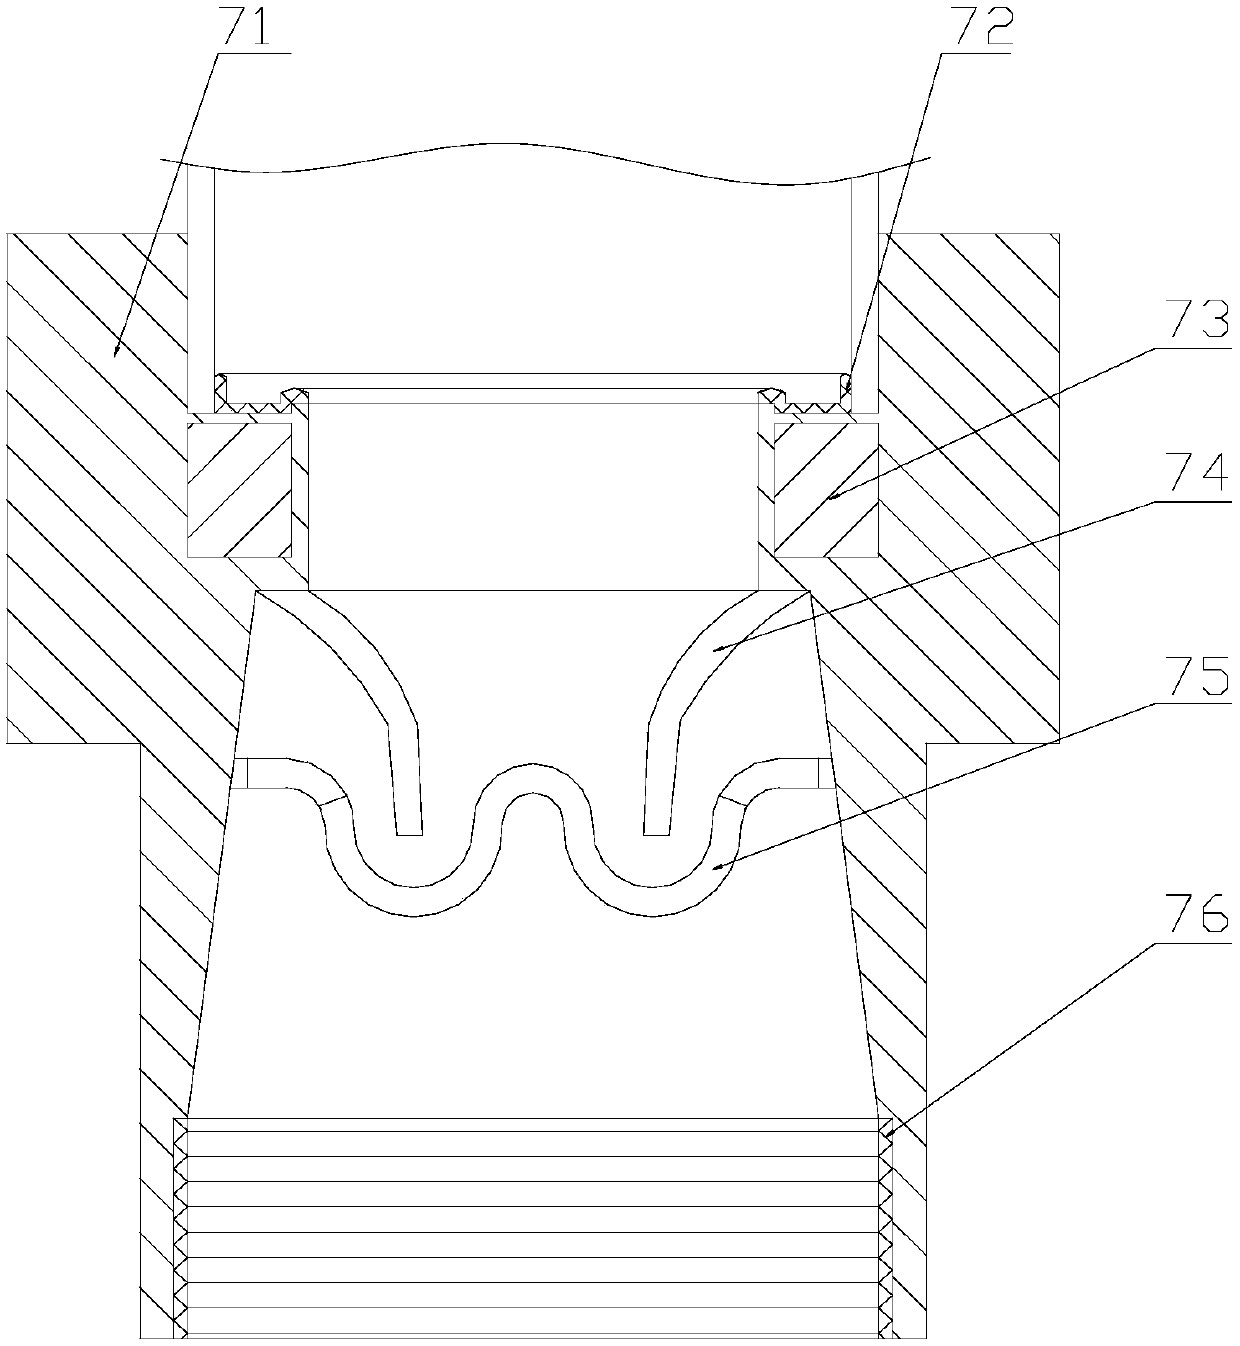 Direct-insert rapid positioning reducer connecting device for metal pipe